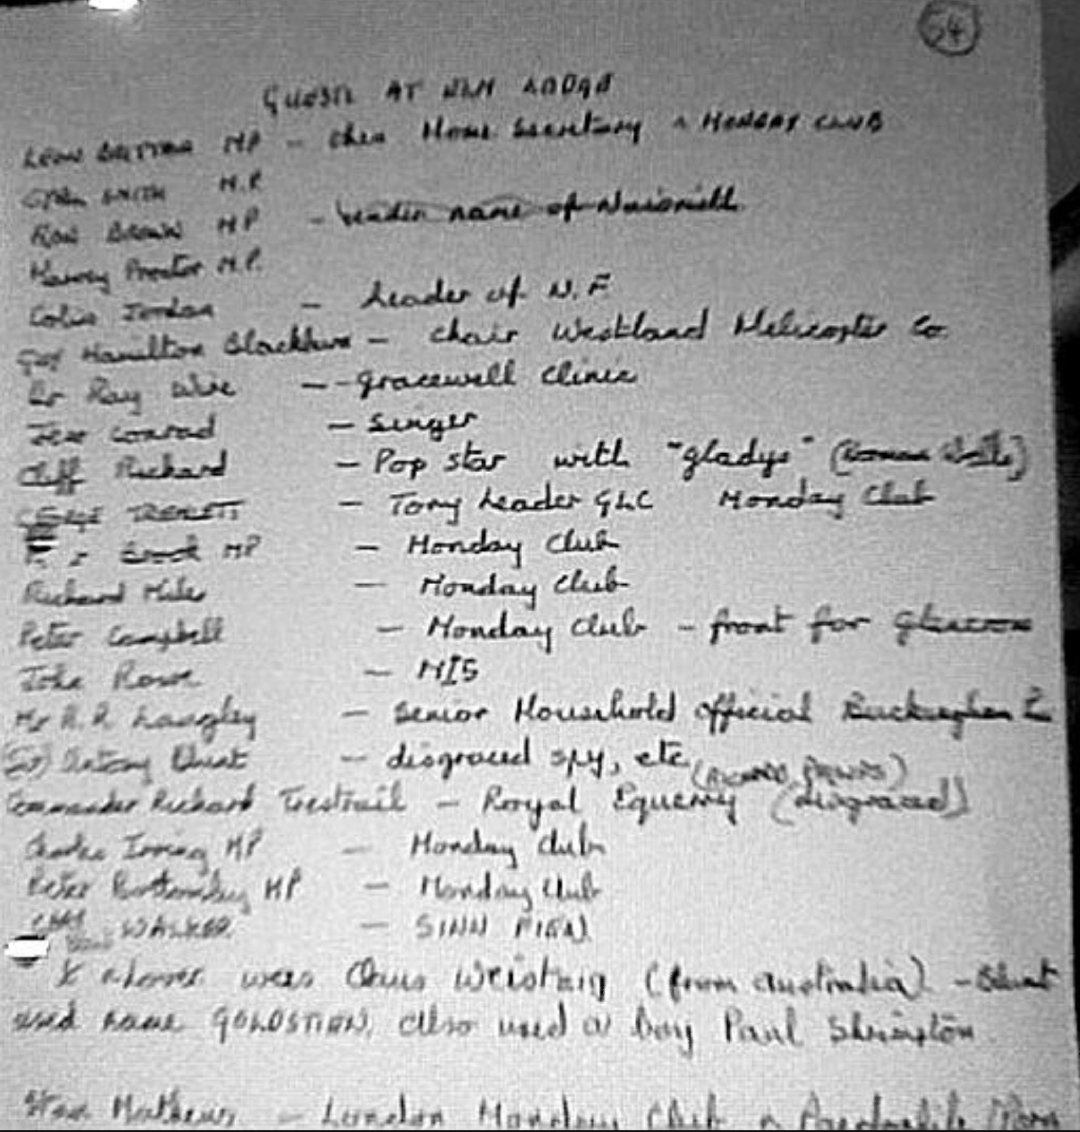 Claire Jervis said the Elm Guest House list was a 'fake', quite a claim as even the Met has never queried its veracity, although they went to lengths to confiscate them, never returning them to this day.RAY WYRE was on the list. https://www.mirror.co.uk/news/uk-news/paedo-brothel-elm-guest-house-1558001  https://theneedleblog.wordpress.com/2013/09/26/the-fake-elm-guest-house-list/amp/#click=https://t.co/dhvEVYyot7